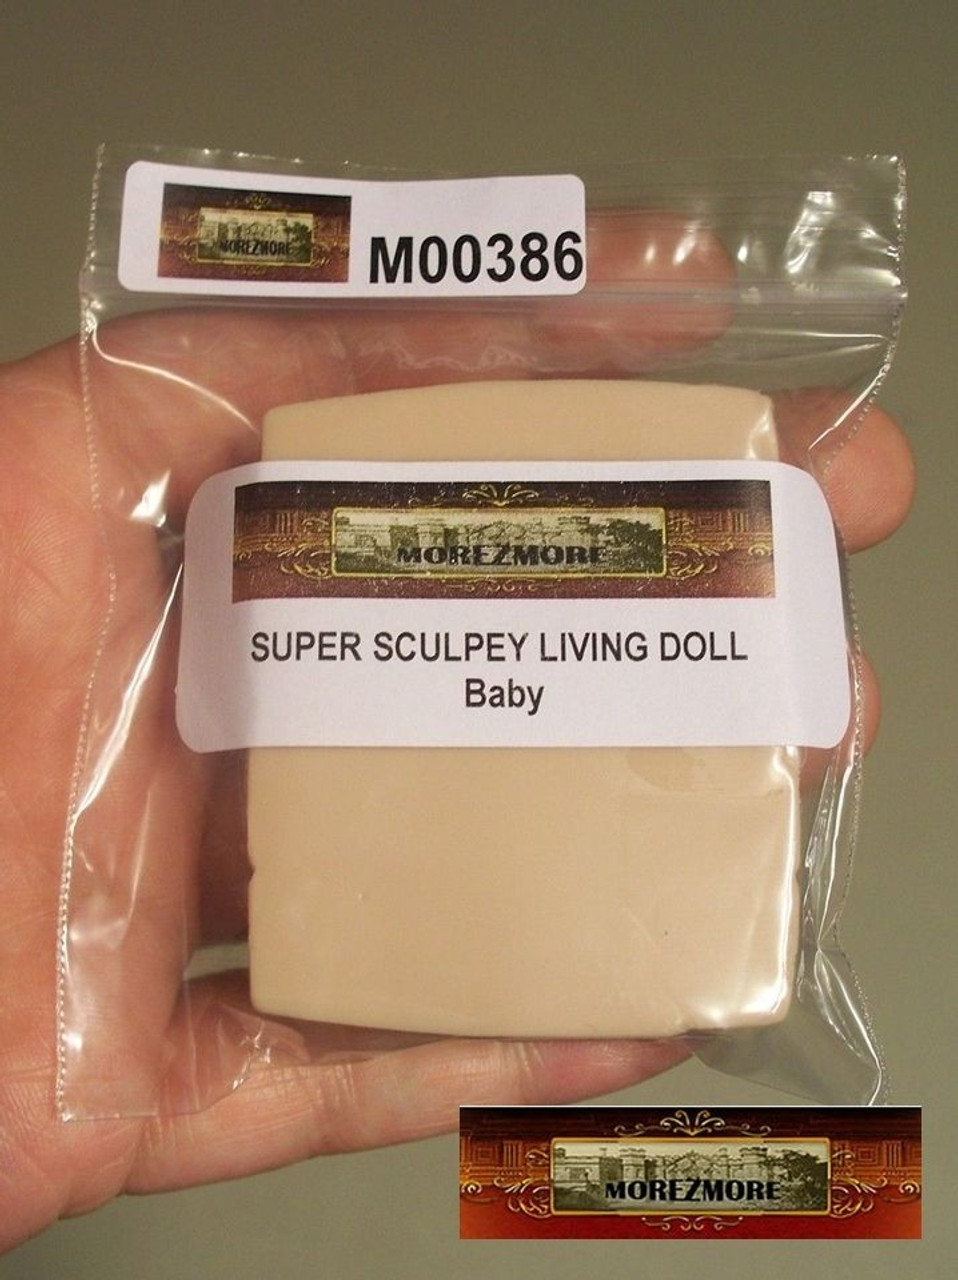 M02093 MOREZMORE 1 lb Living Doll BABY Polymer Oven-Bake Clay Super Sculpey